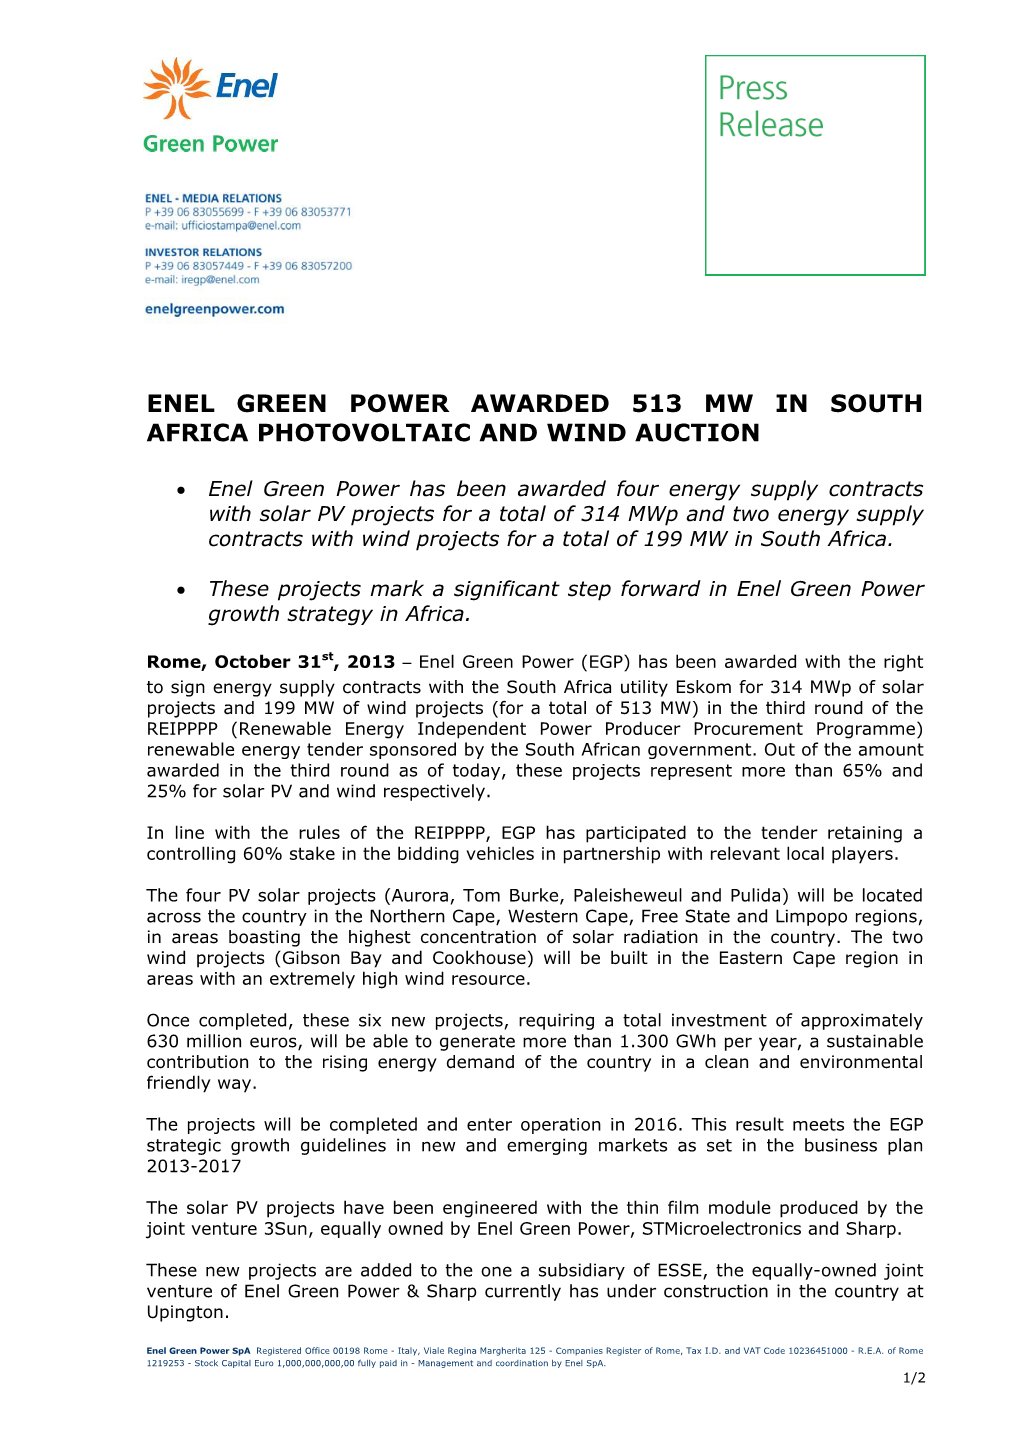 Enel Green Power Awarded 513 Mw in South Africa Photovoltaic and Wind Auction